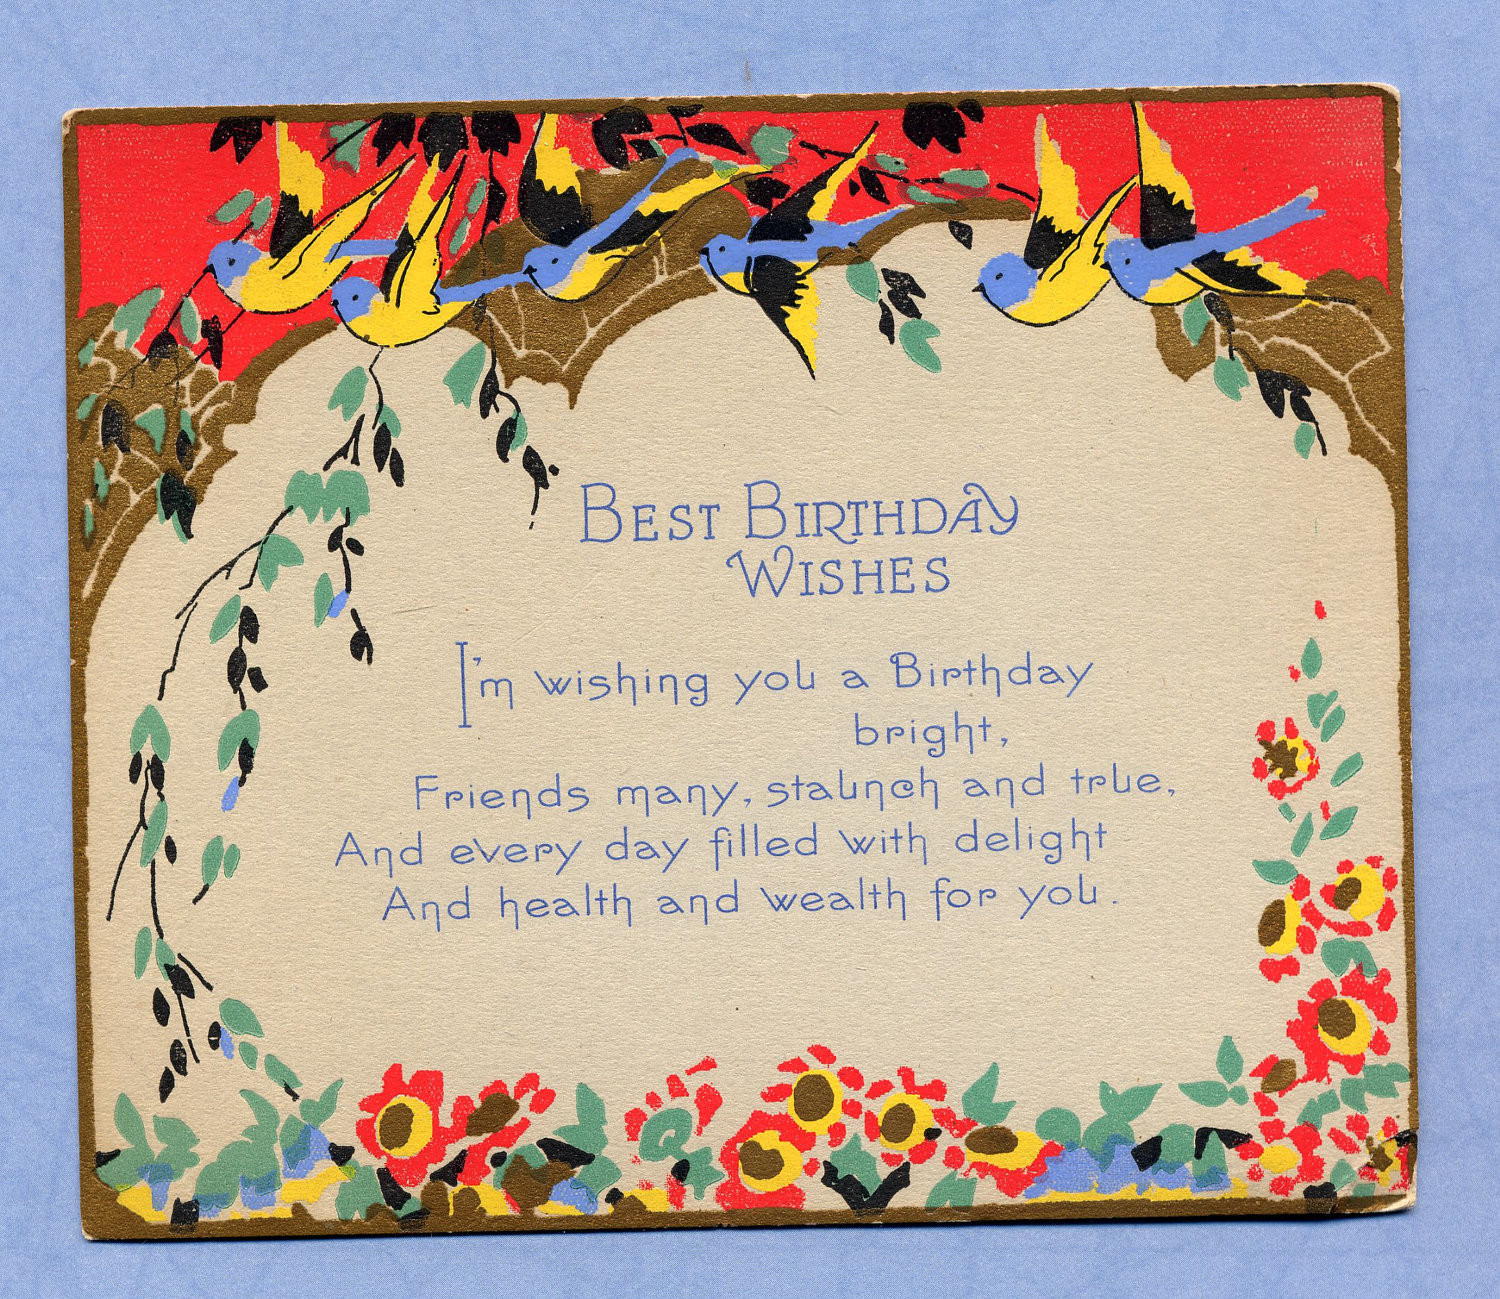 Birthday Wishes For A Guy Friend
 Best Happy Birthday Wishes For Friends – Themes pany